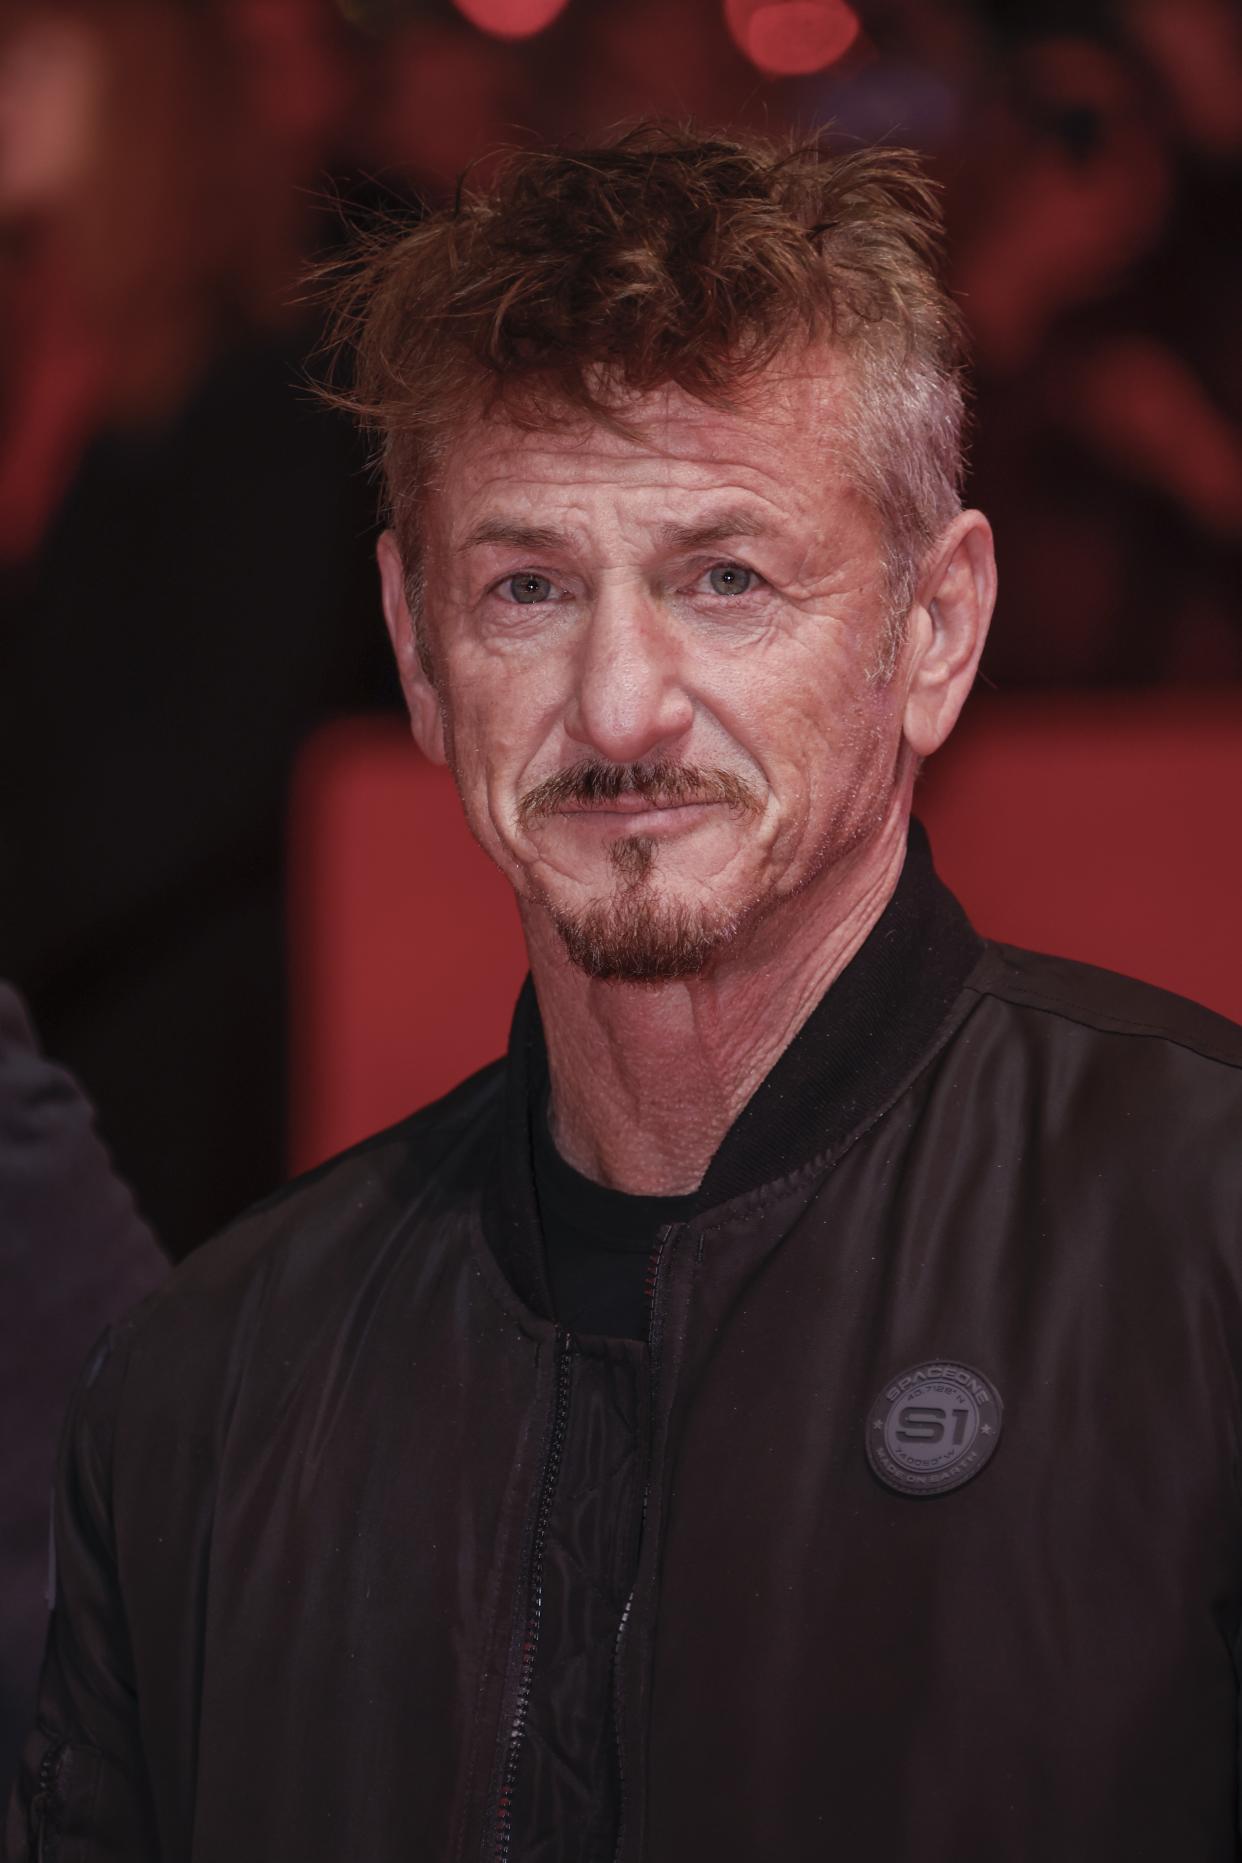 Sean Penn poses for photographers at the premiere for the film 'Superpower' during the International Film Festival 'Berlinale', in Berlin, Germany, Friday, Feb. 17, 2023. (Photo by Joel C Ryan/Invision/AP)